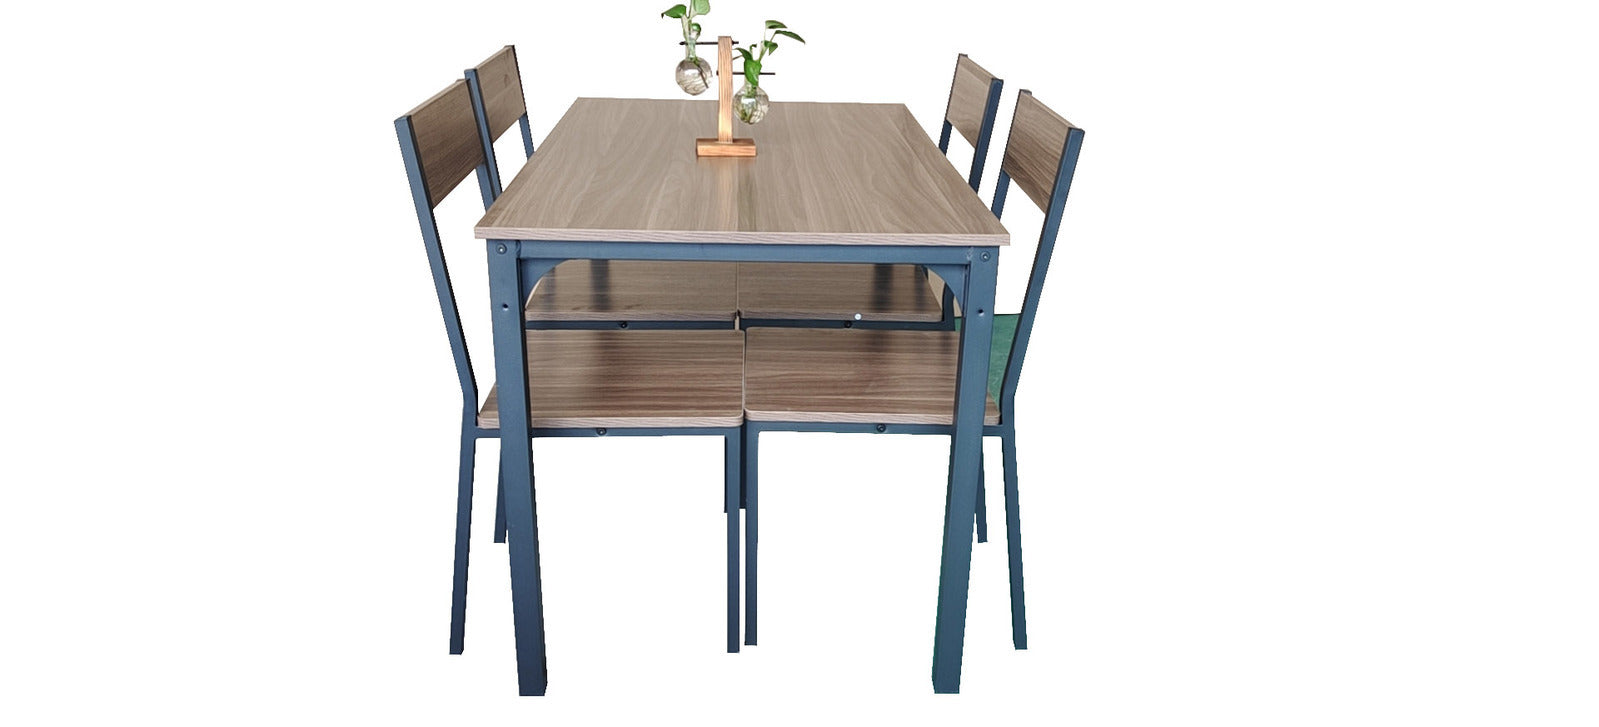 Stylish 5-Piece Dining Set: Perfect for Your Kitchen or Dining Room